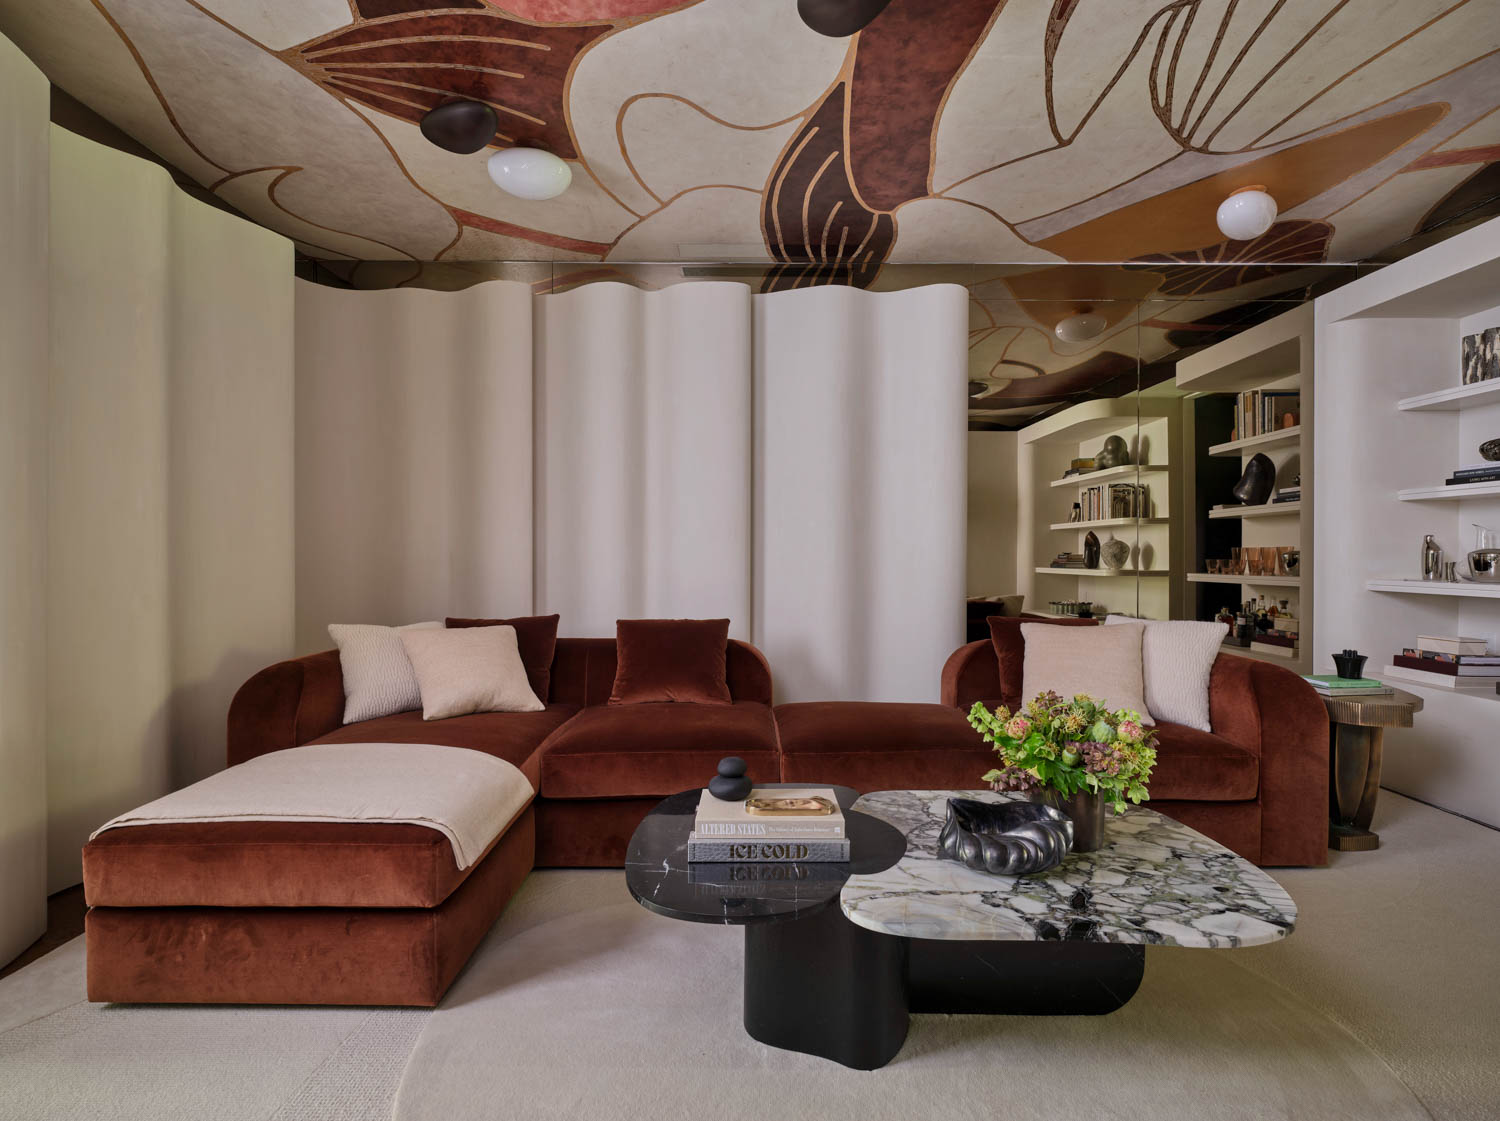 lounging room with earth tones